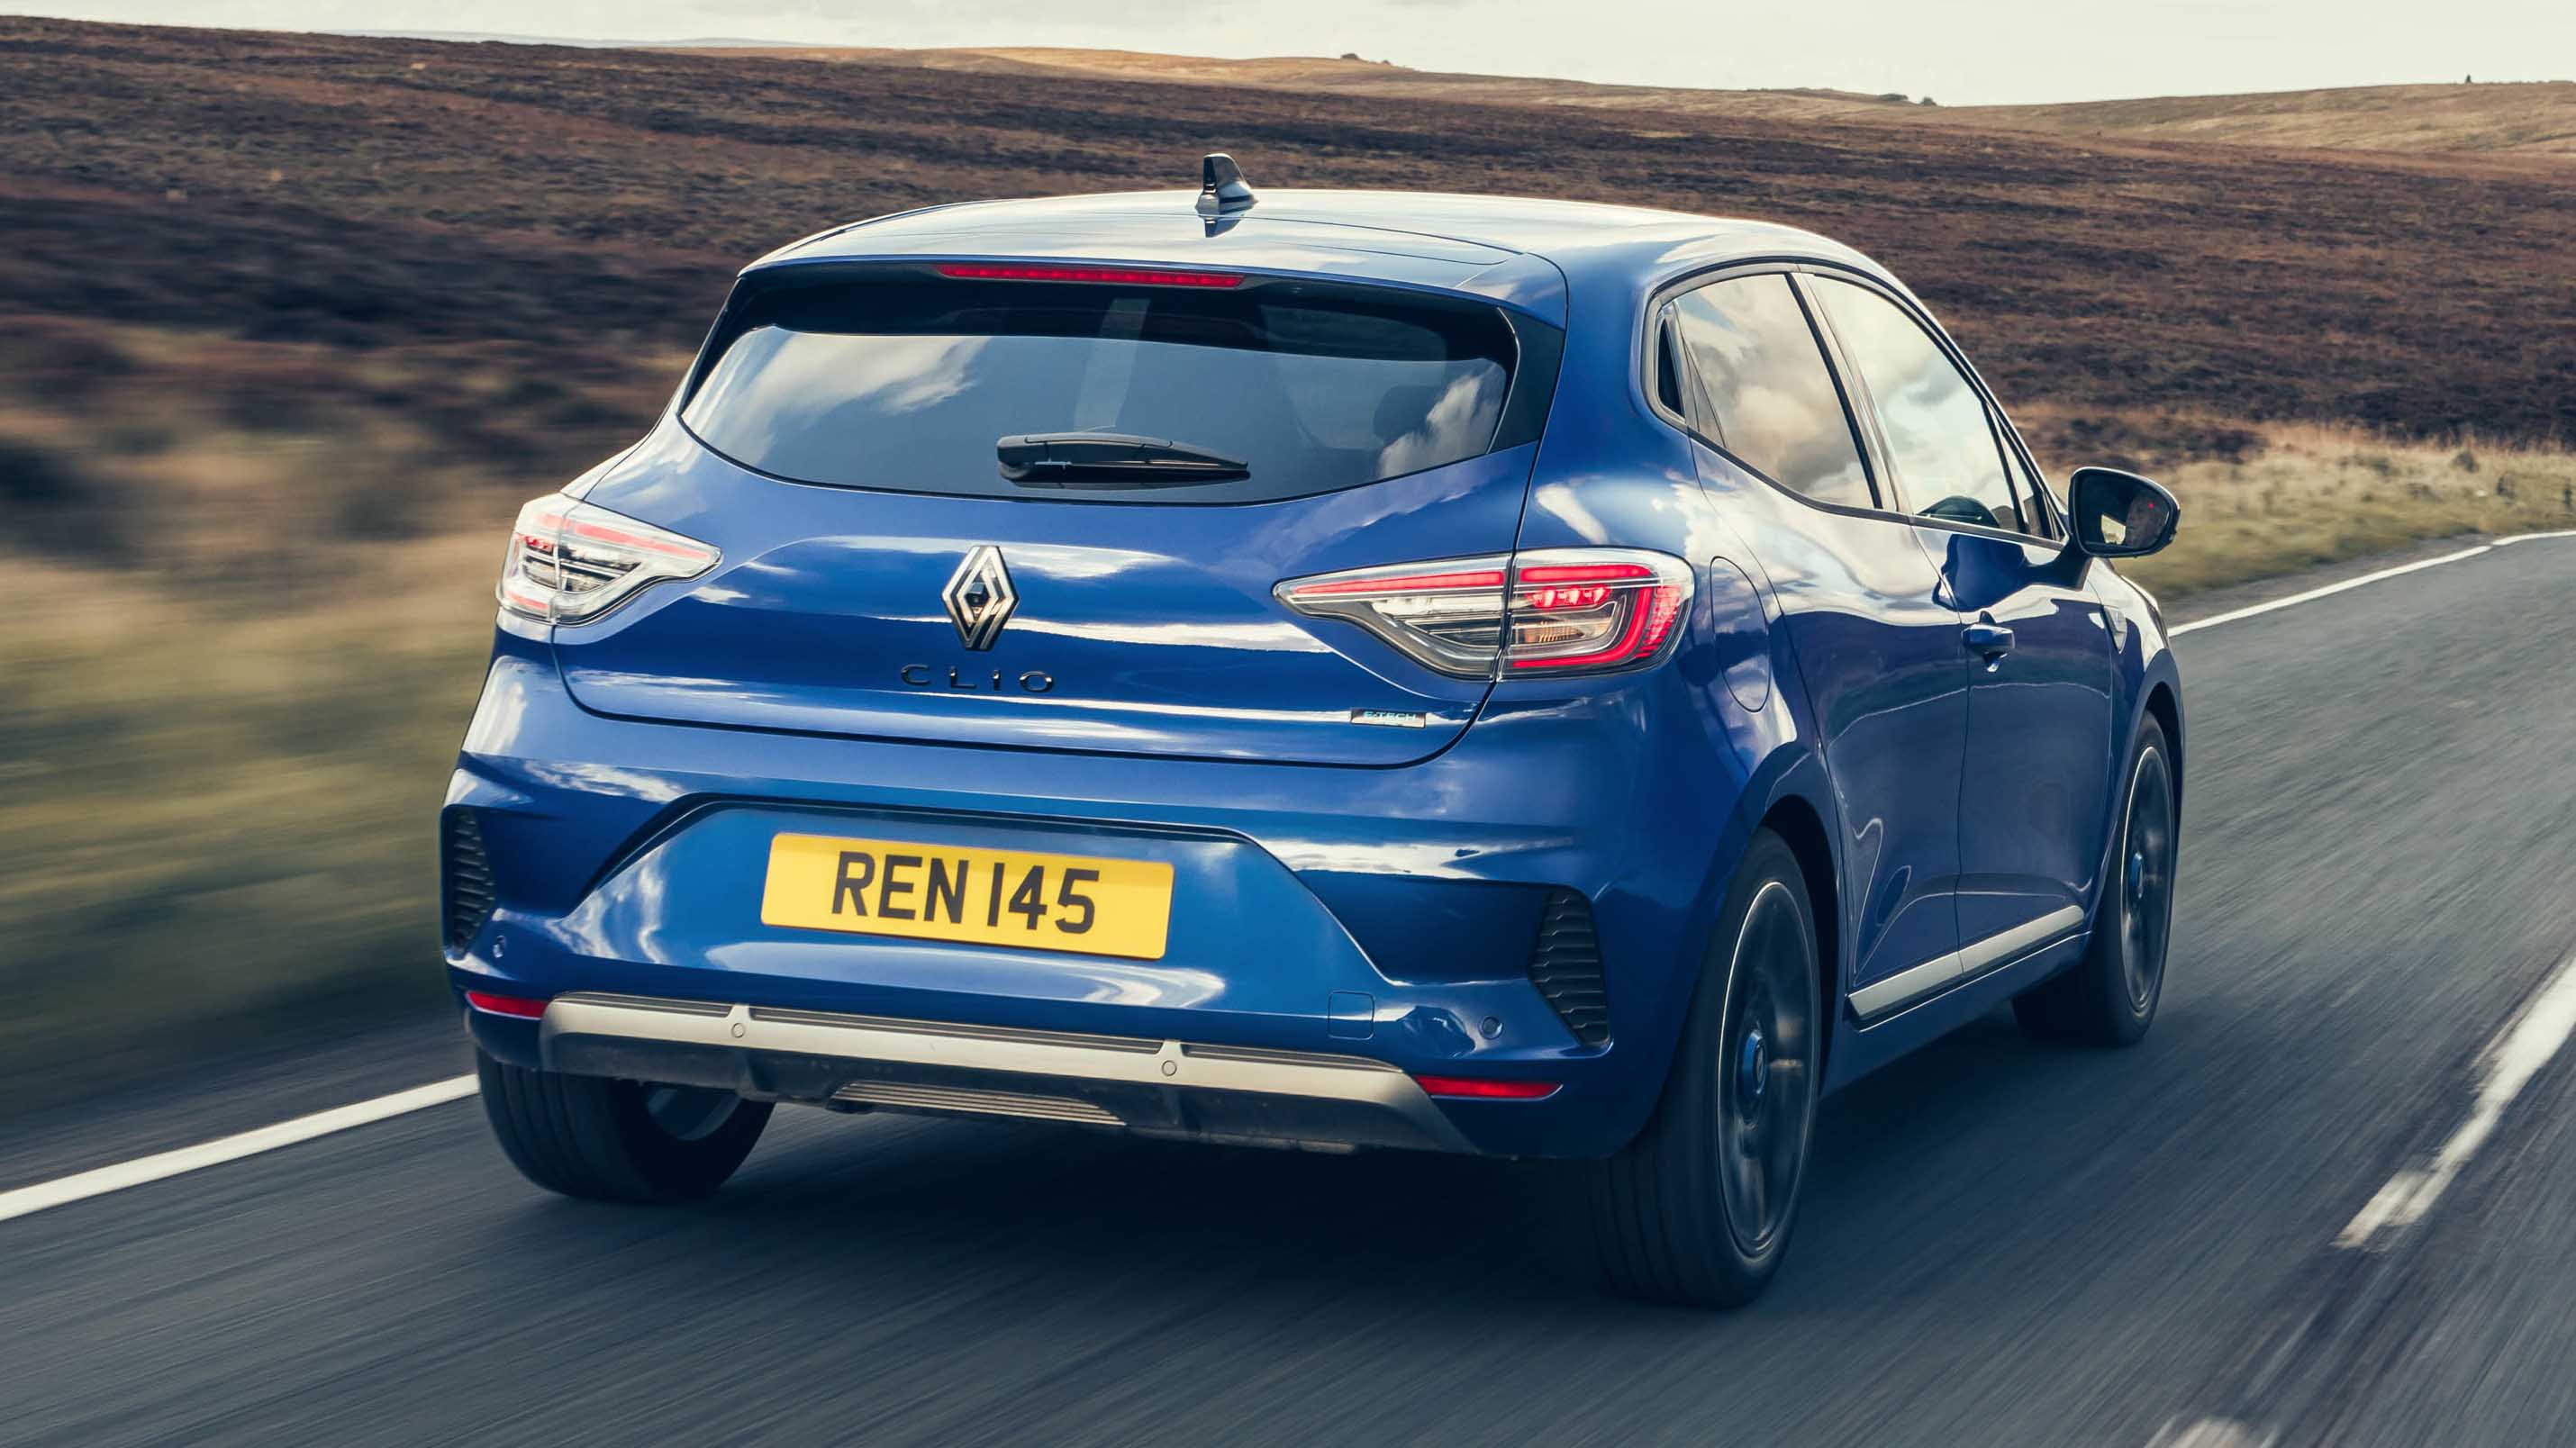 Renault Clio driving rear view